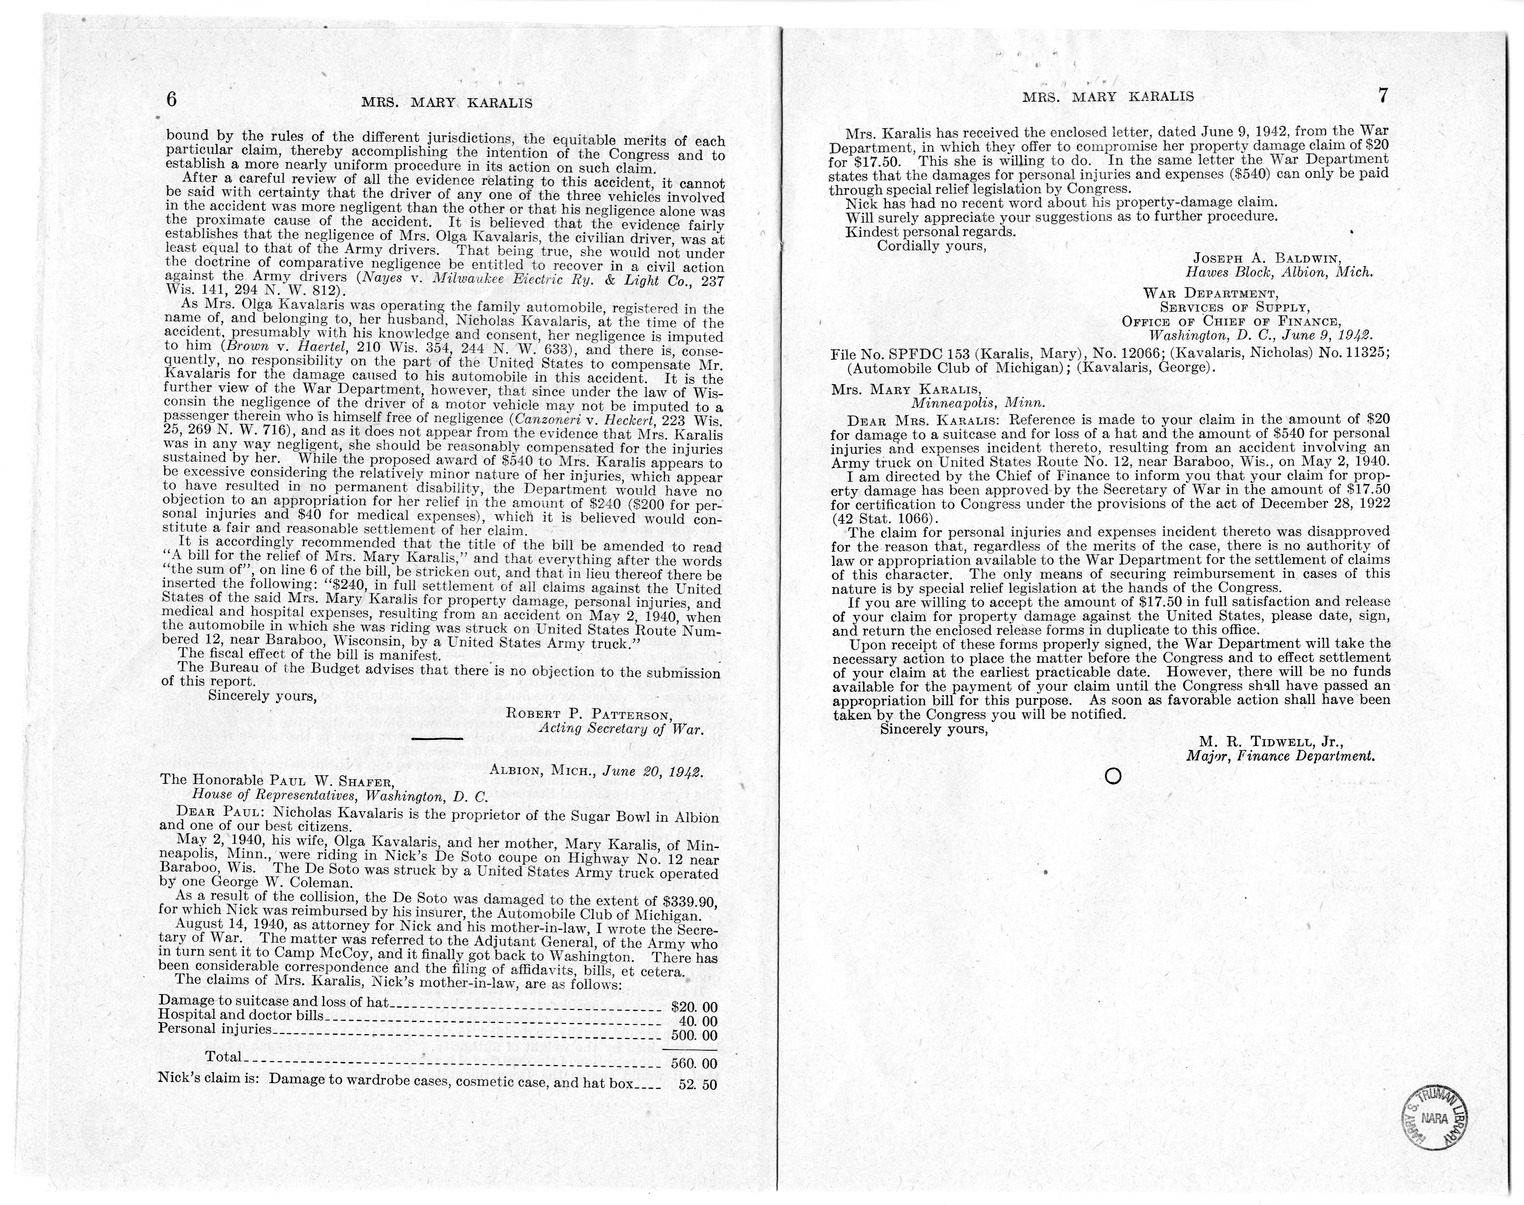 Memorandum from Frederick J. Bailey to M. C. Latta, H.R. 1054, For the Relief of Mrs. Mary Karalis, with Attachments